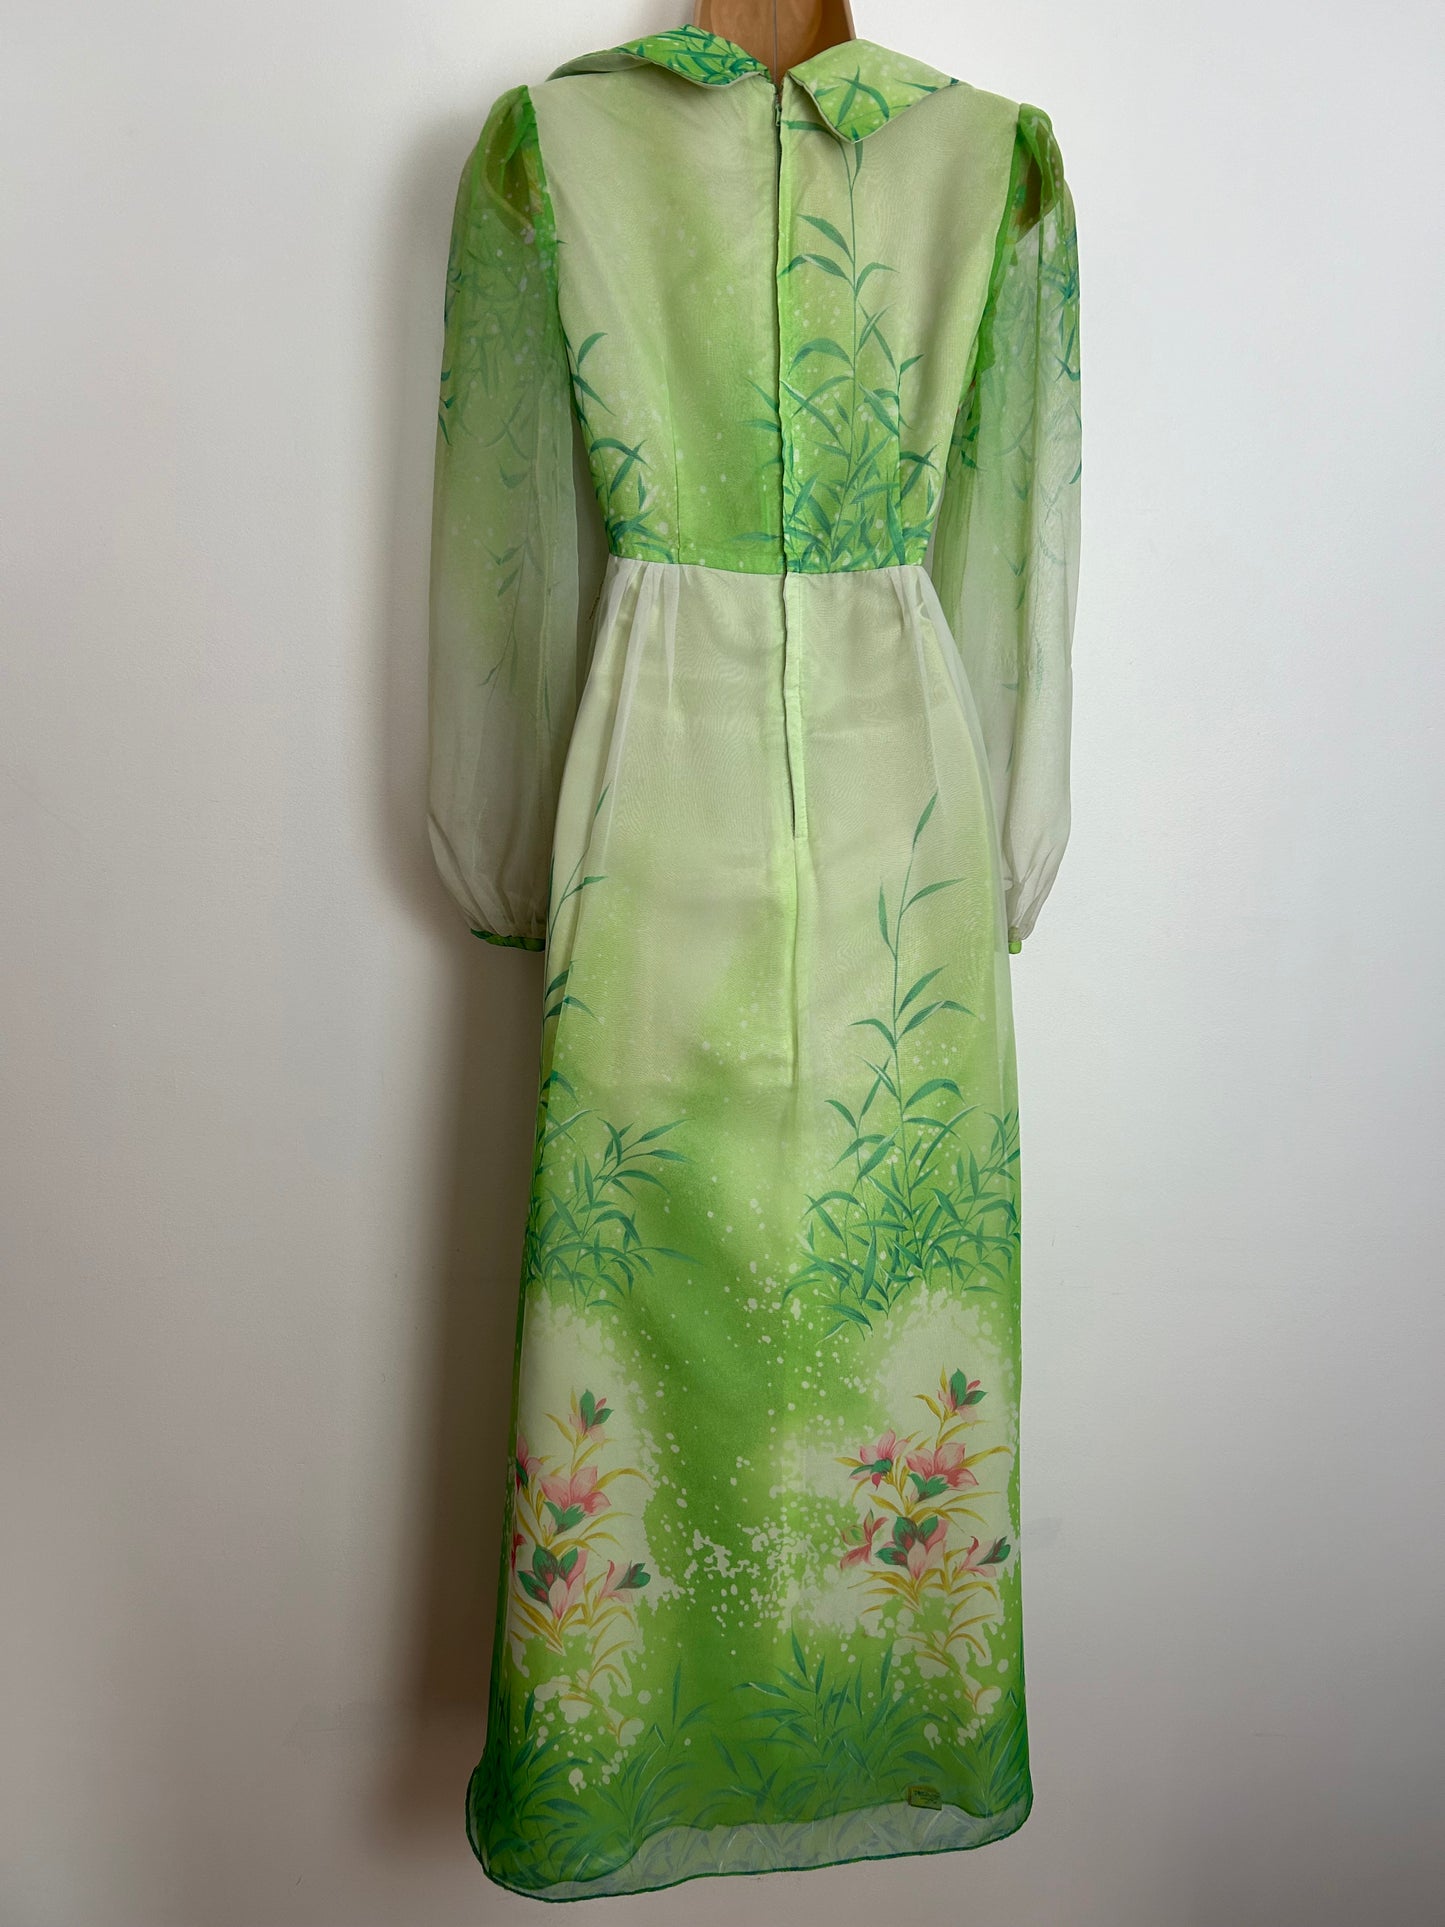 Vintage 1970s UK Size 8 Green & Pink Floral Print Chiffon Wide Collared Long Sleeve Boho Maxi Dress